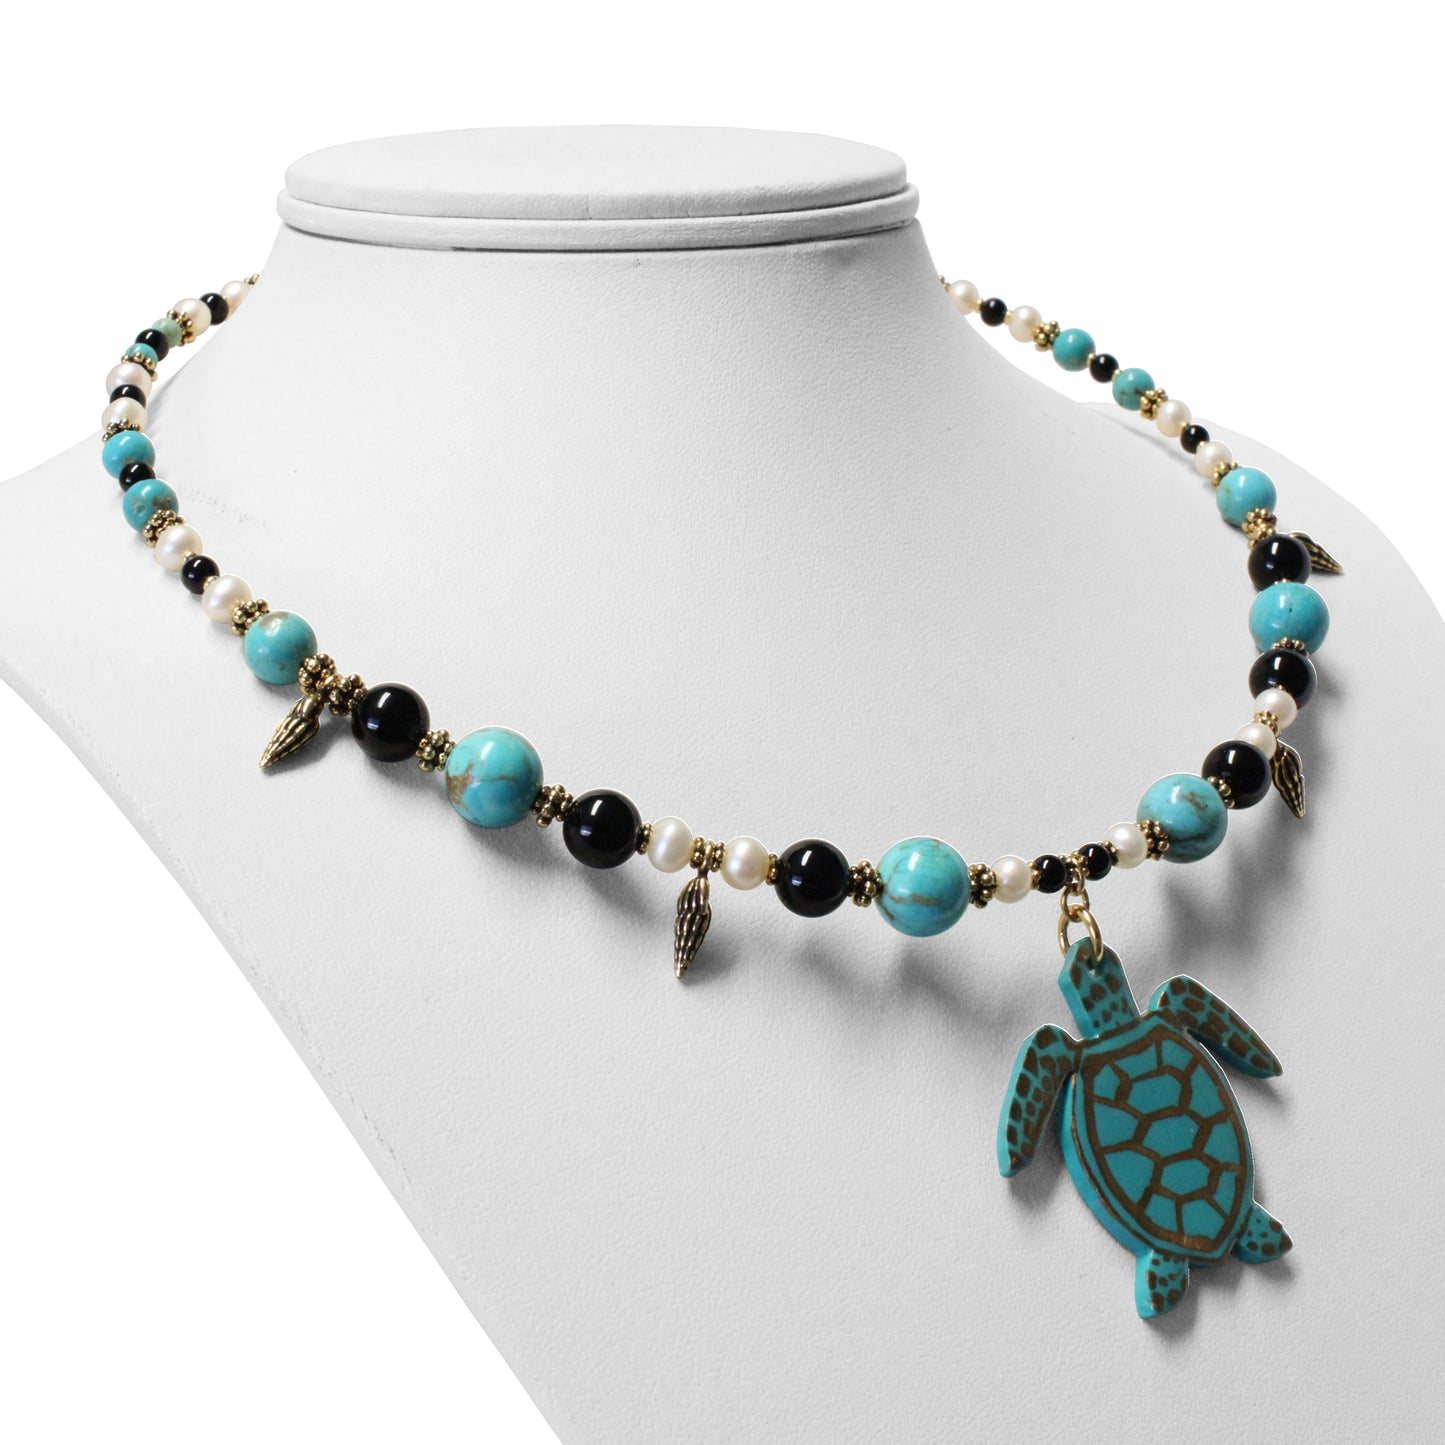 Sea Turtle Necklace / 16-18 Inch length / #8 Mine turquoise gemstones /  hand-painted pendant